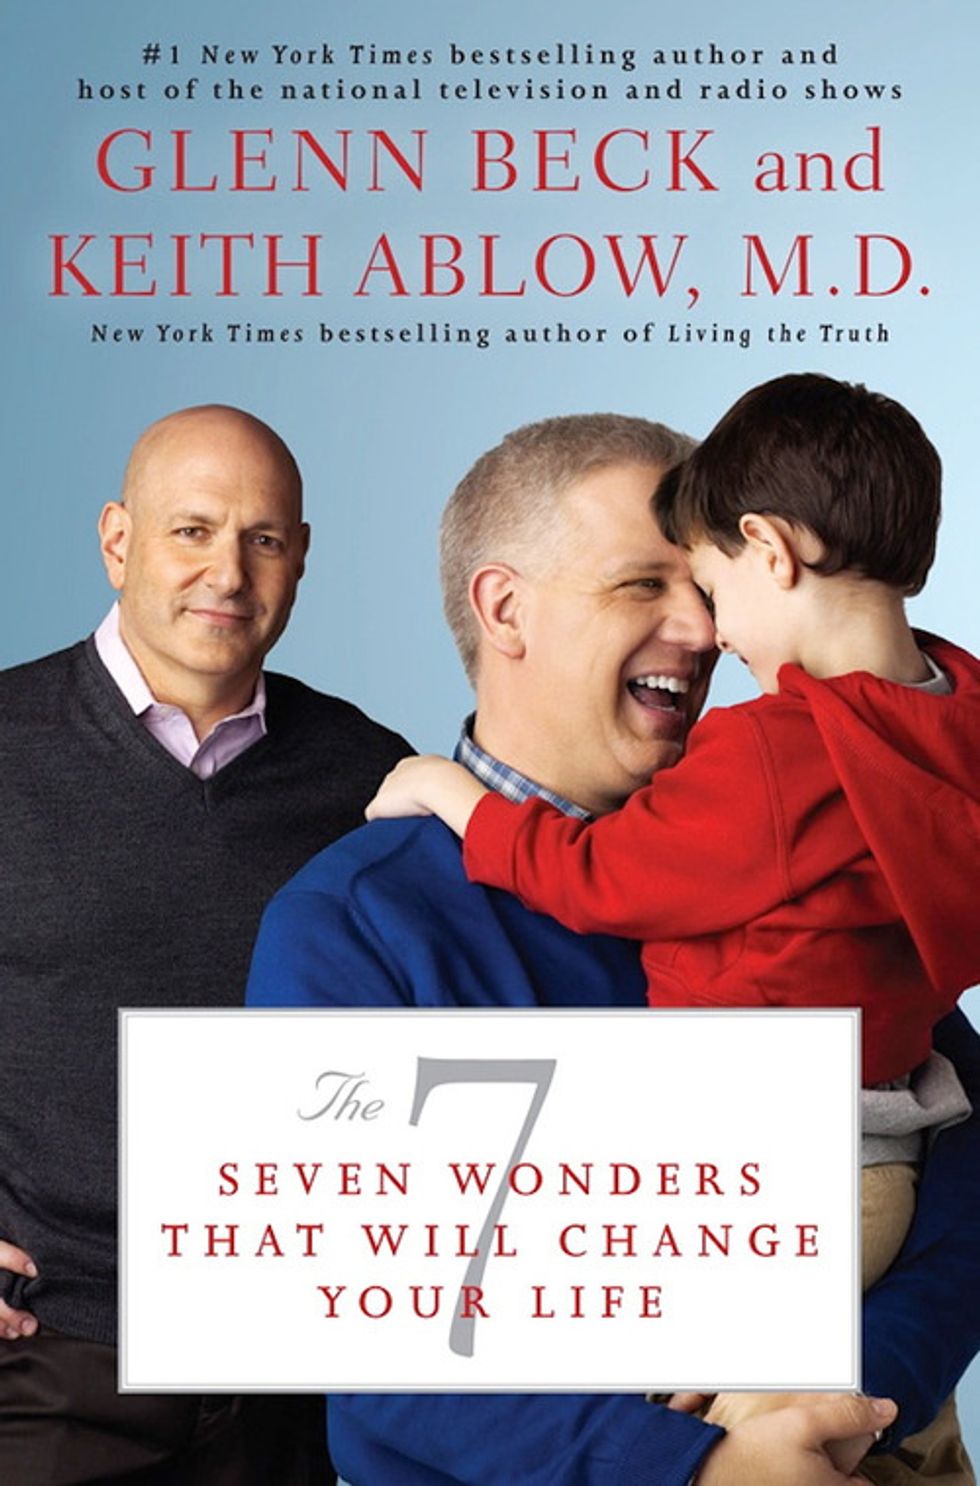 What Exactly Is Glenn Beck Doing With This Child On His New Book's Cover?